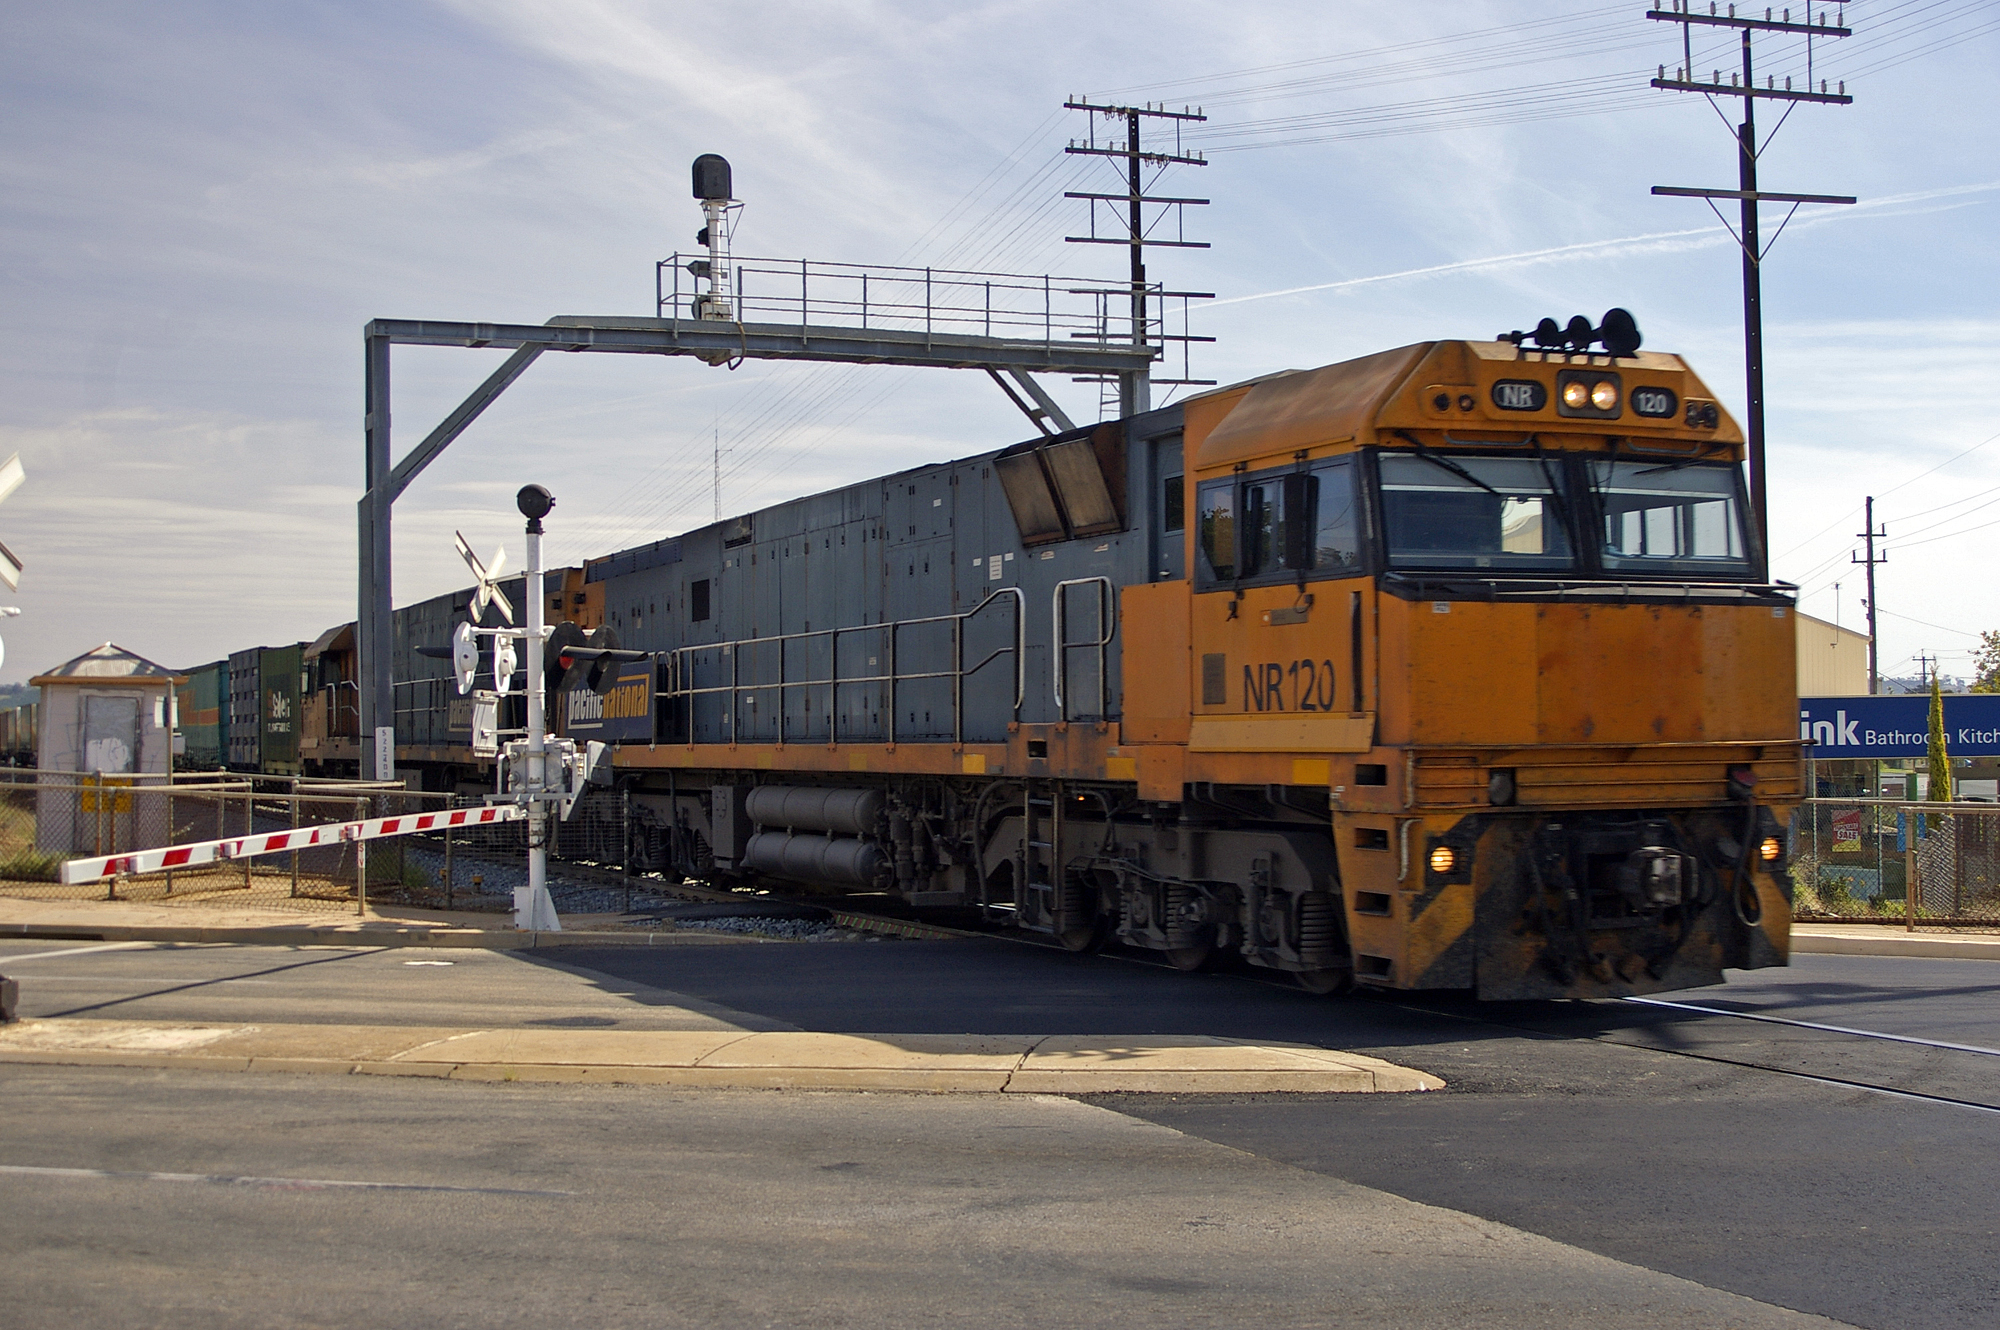 File:NR class 120 and 15 diesel electric locomotives.jpg - Wikimedia ...